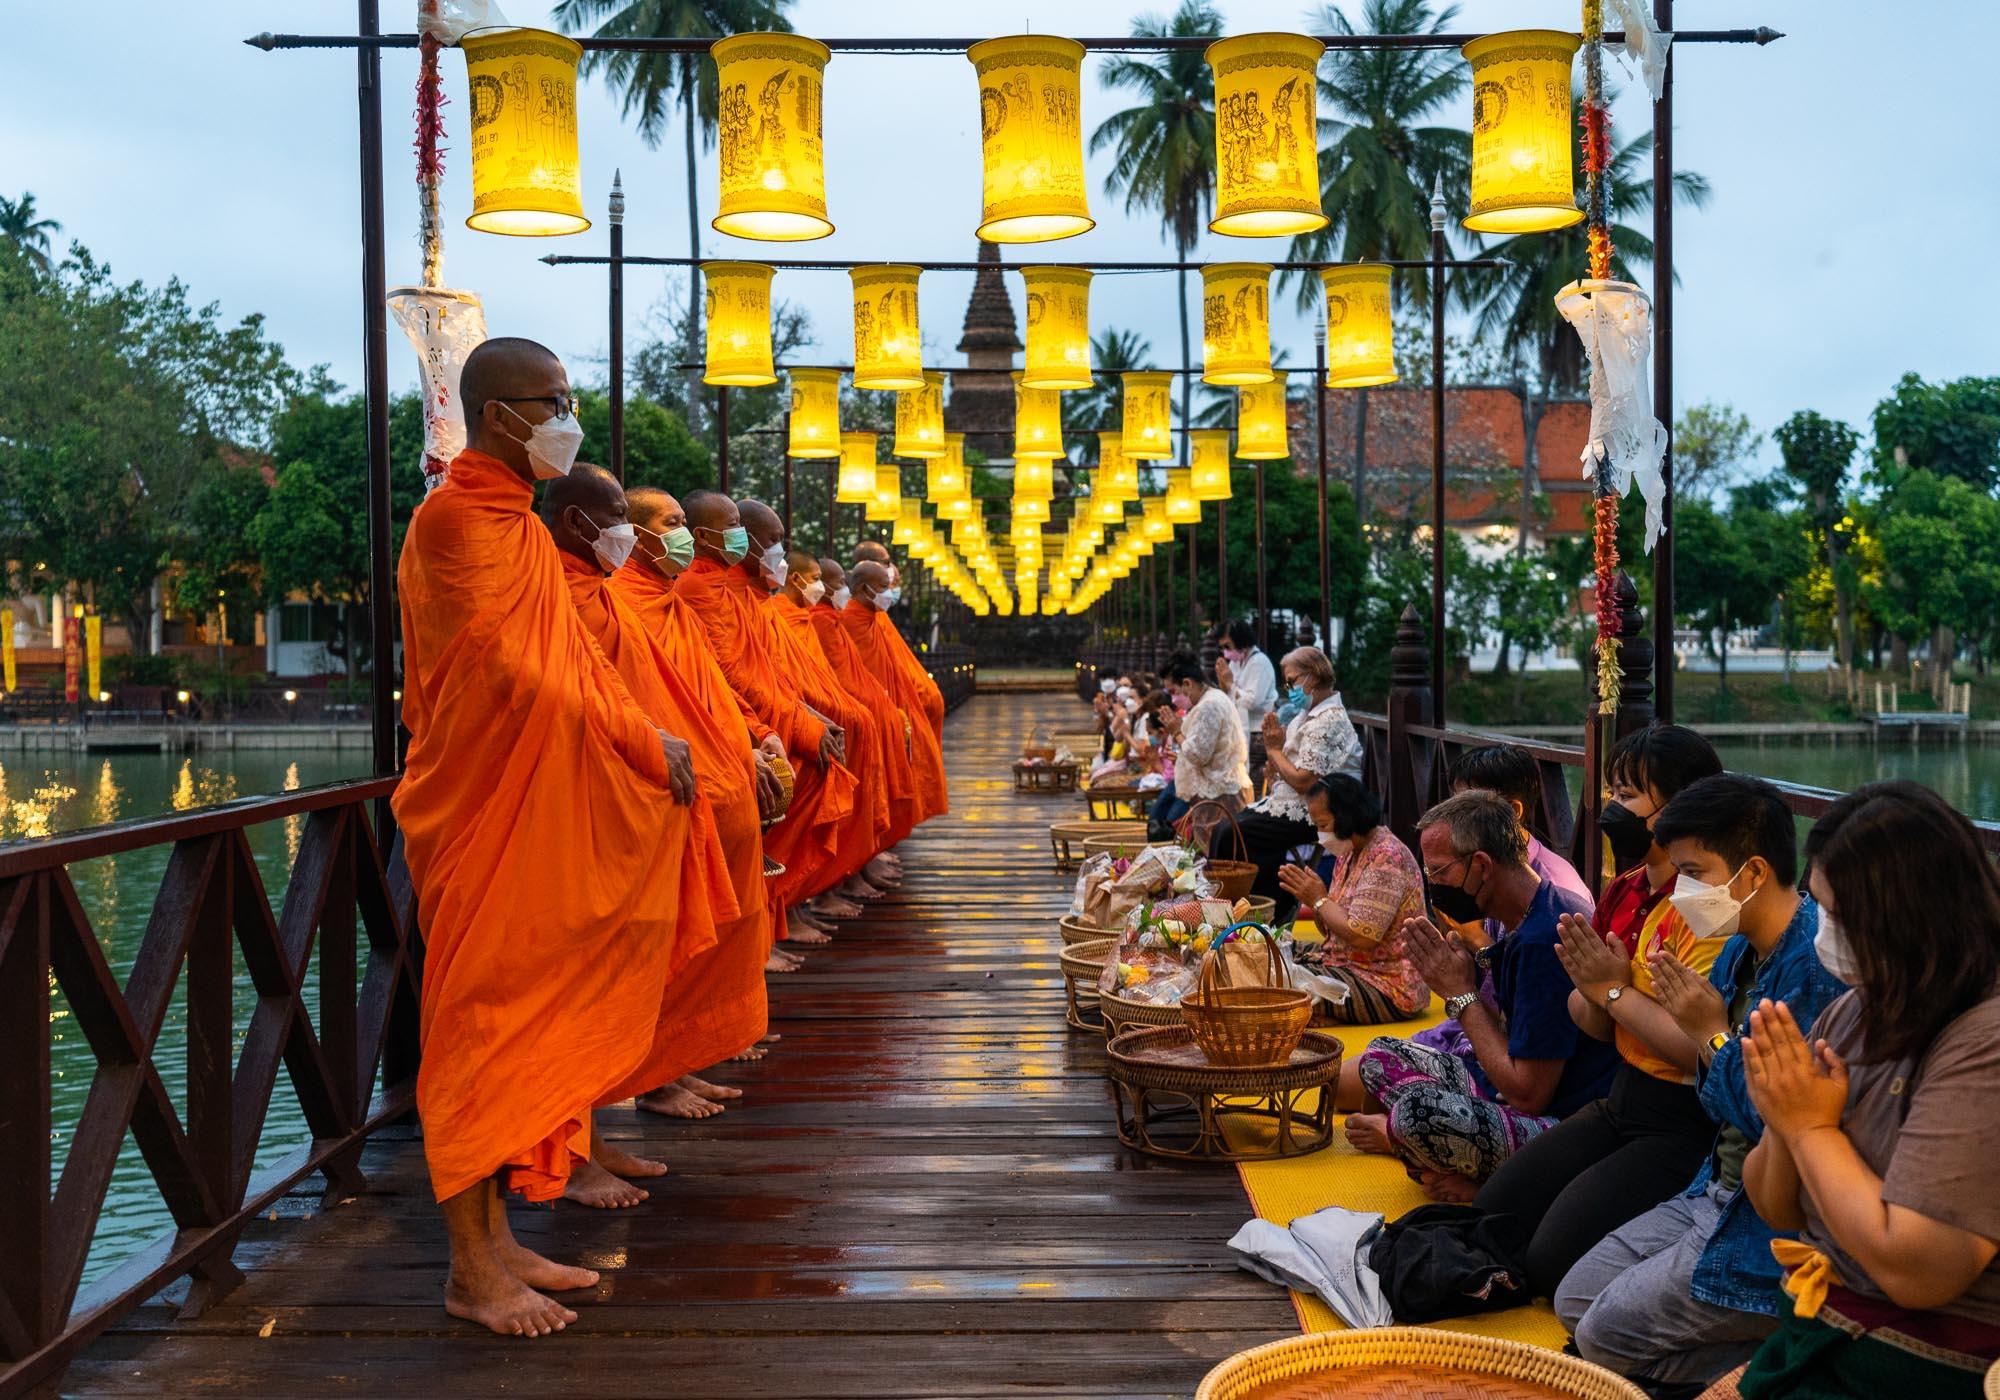 The gathering of monks for morning alms at Wat Traphang Thong is an authentic experience, even though it's been arranged partly for tourists. – © Michael Turtle